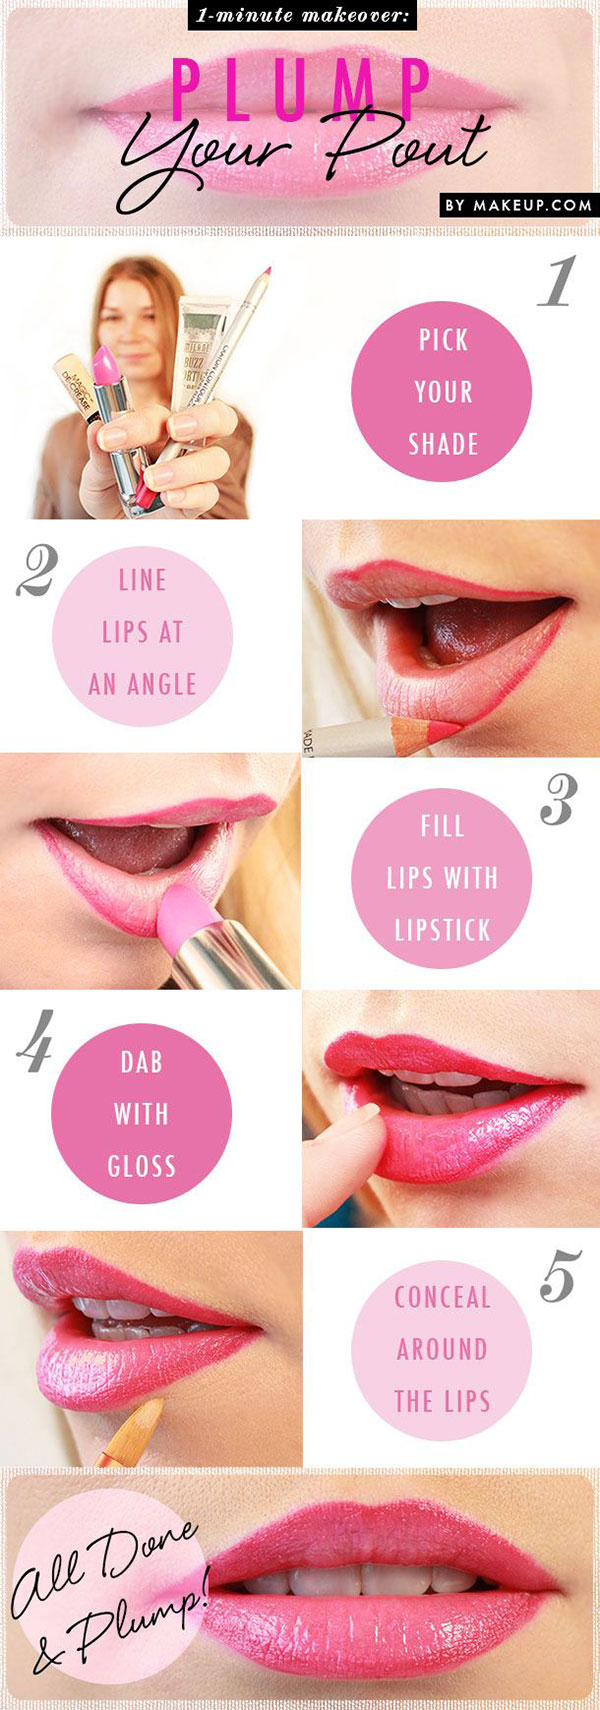 One Minute Makeover to Make Your Lips Look More Plump. 